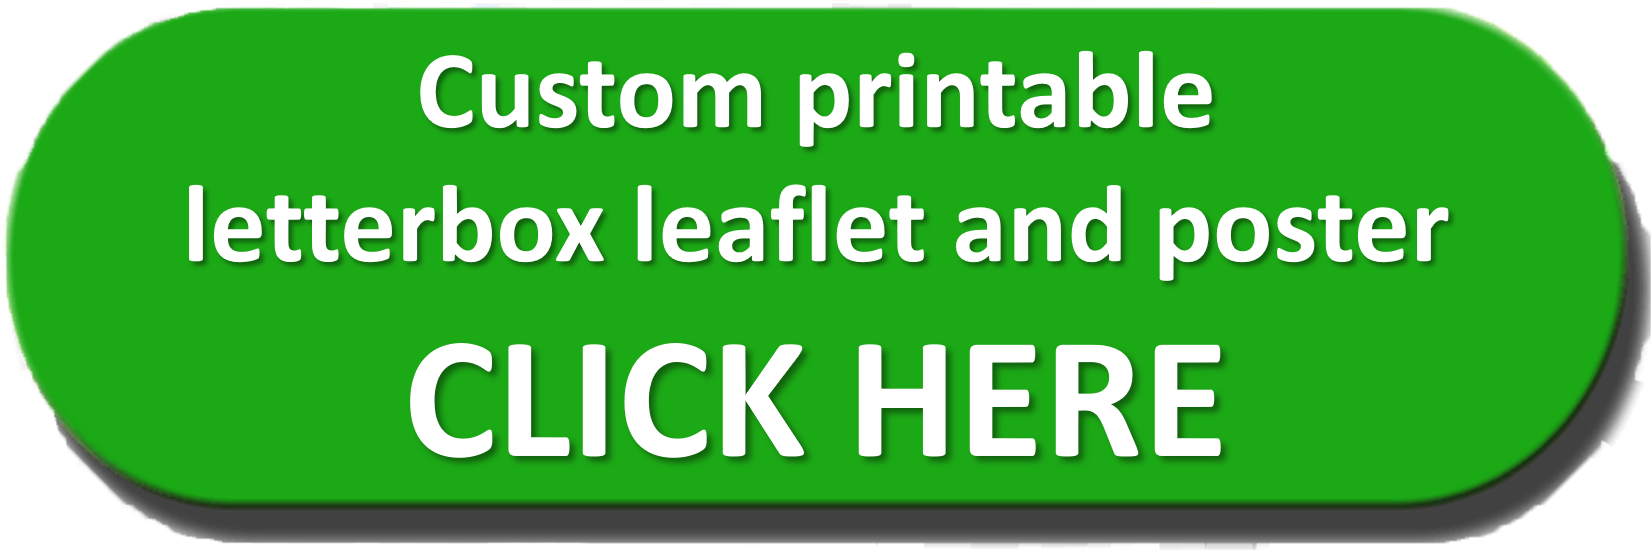 Click here to pay £3 for custom lost Cat poster and letterbox leaflets